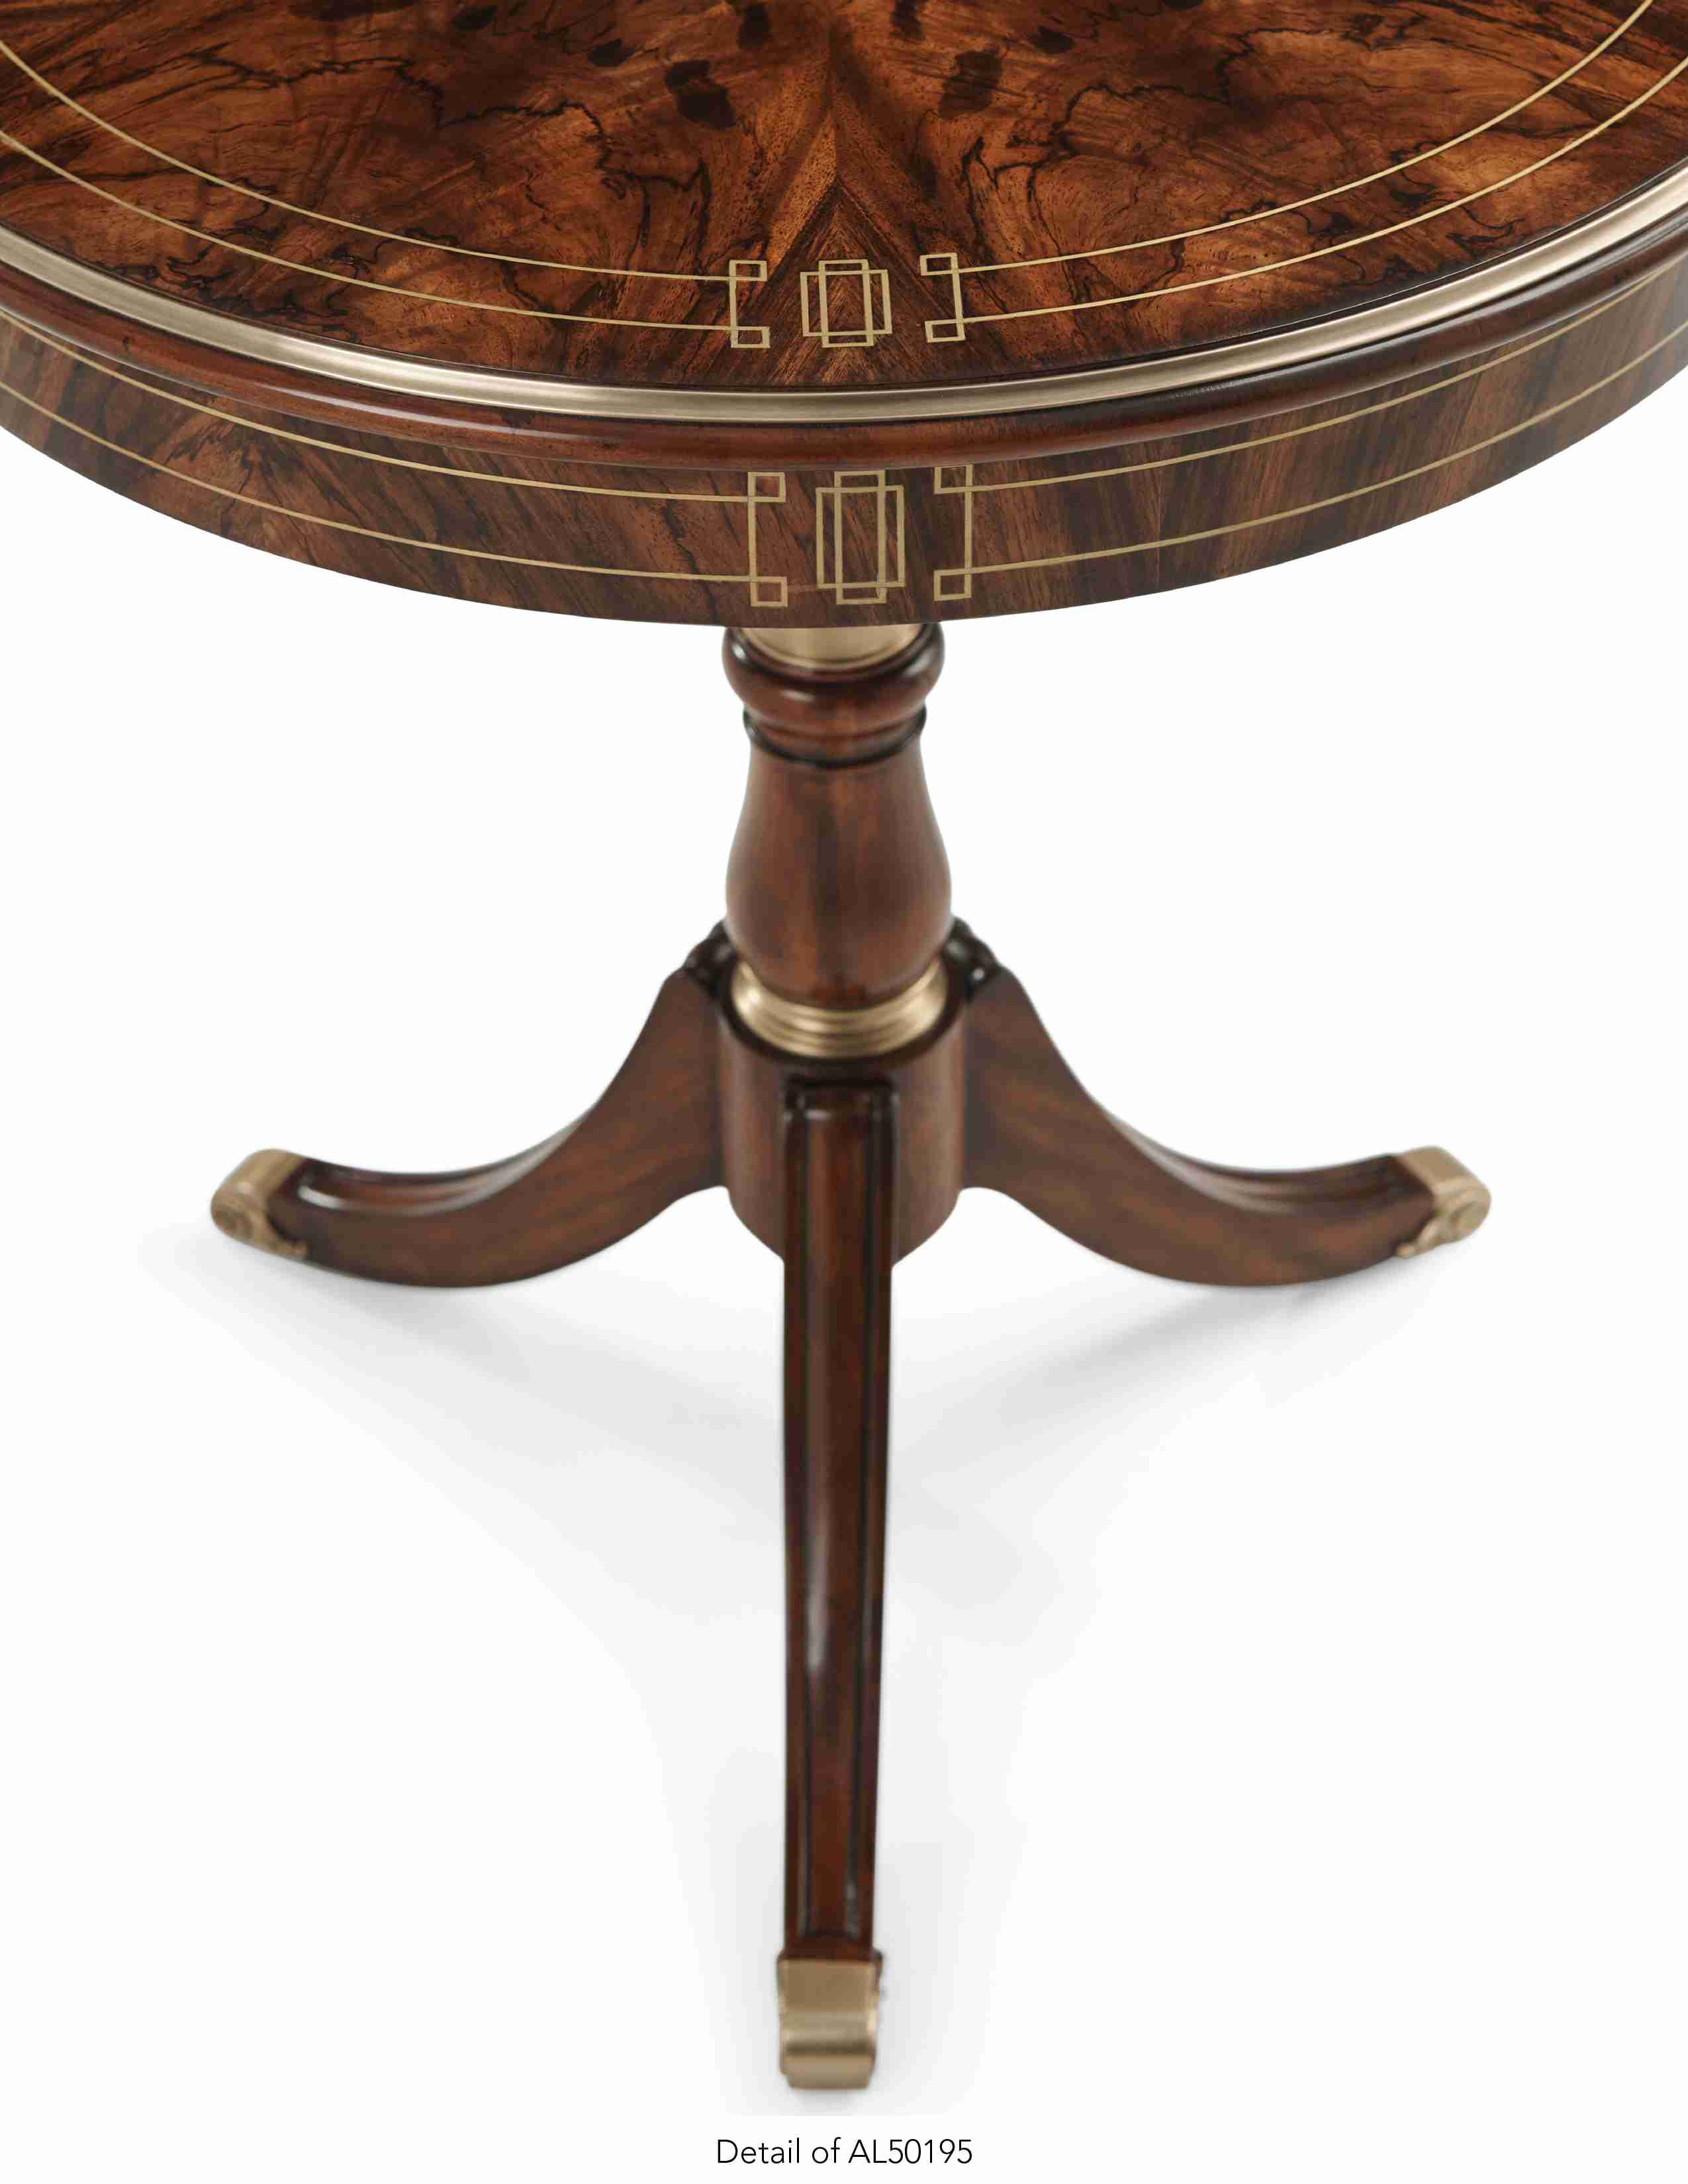 SOUTH DRAWING ROOM OCCASIONAL TABLE